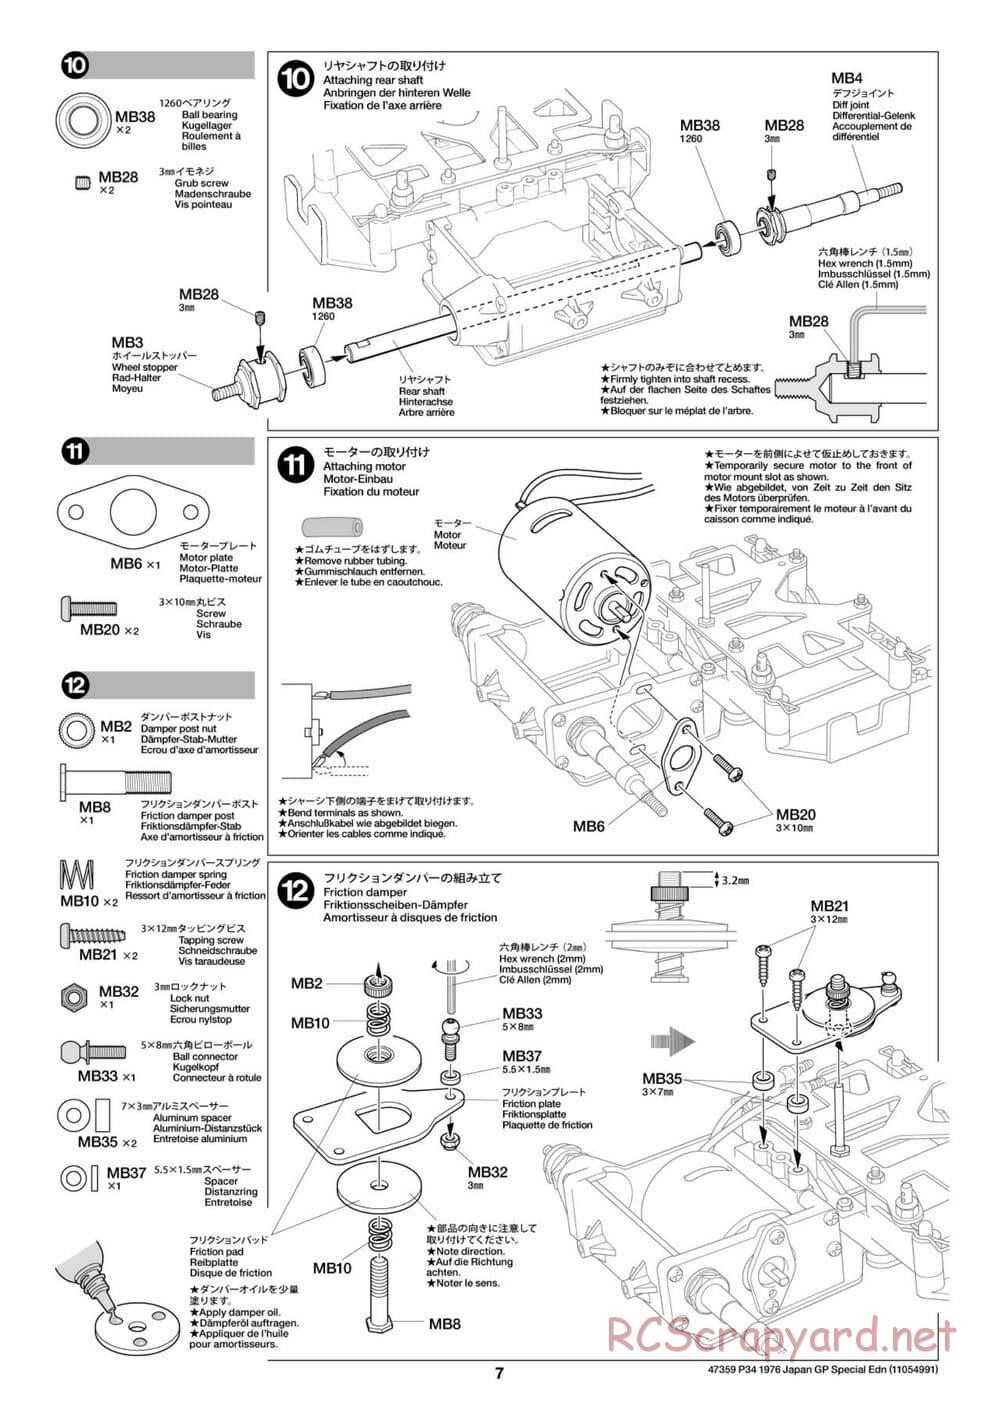 Tamiya - Tyrrell P34 1976 Japan Grand Prix Special - F103-6W Chassis - Manual - Page 7